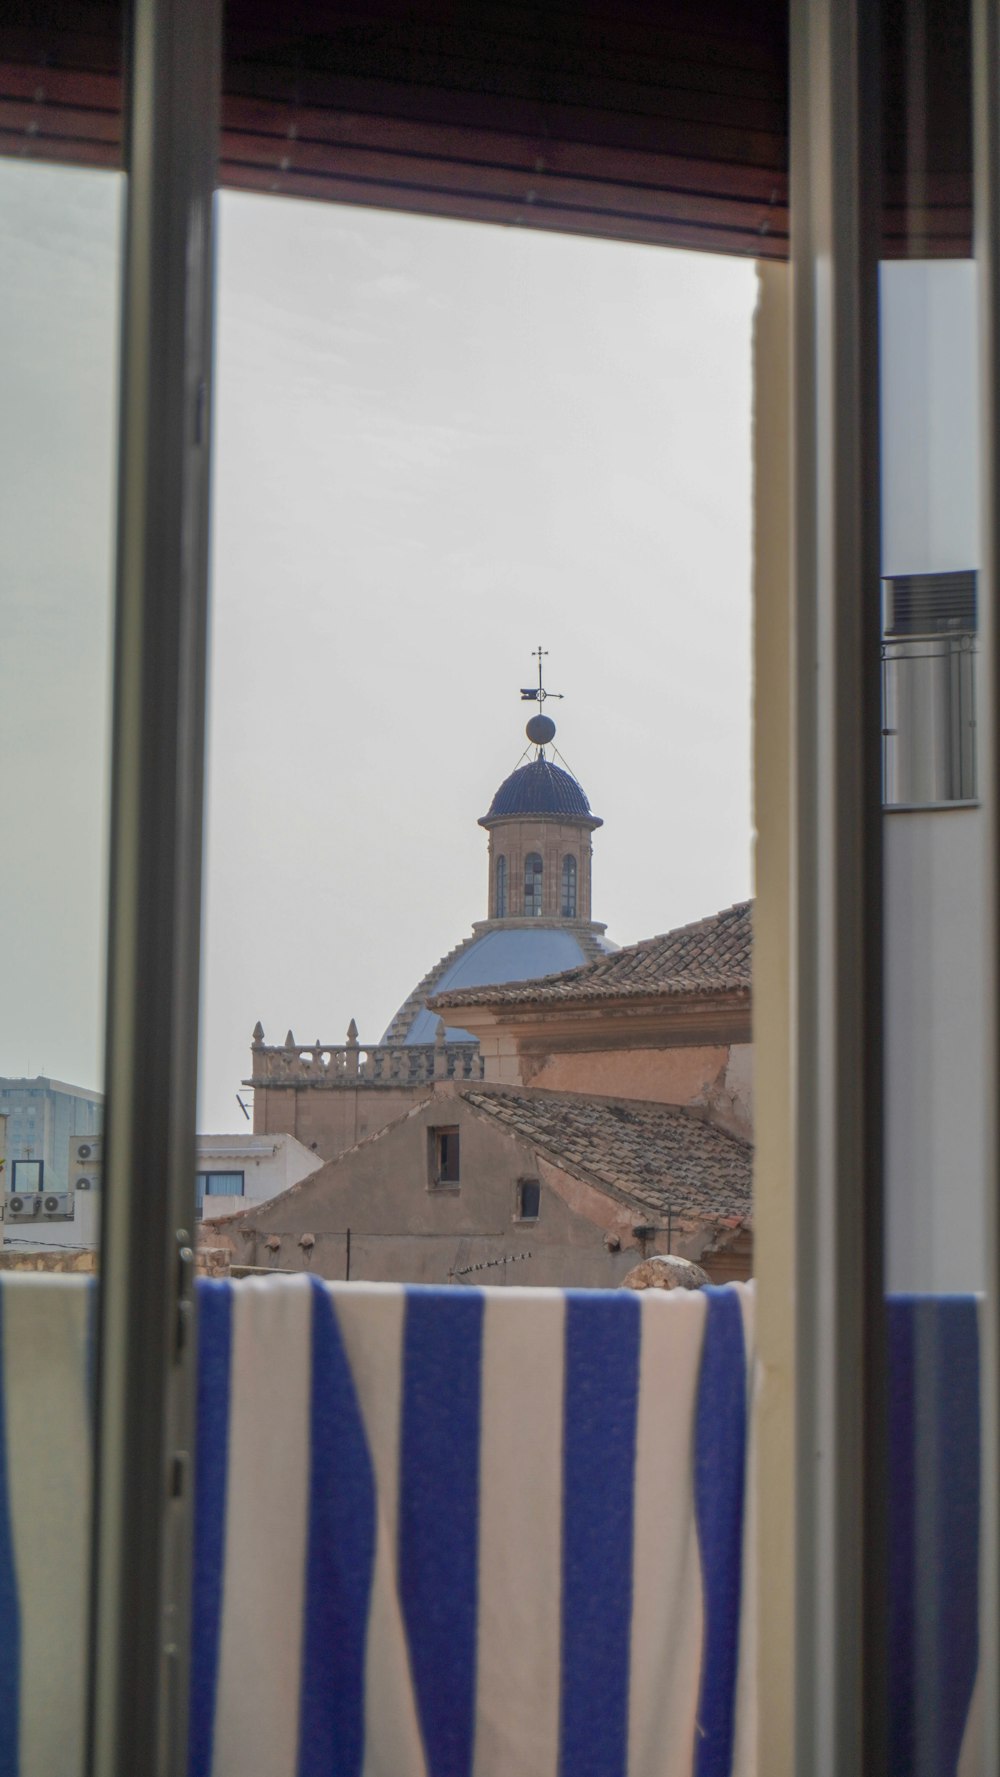 a view out of a window of a building with a clock tower